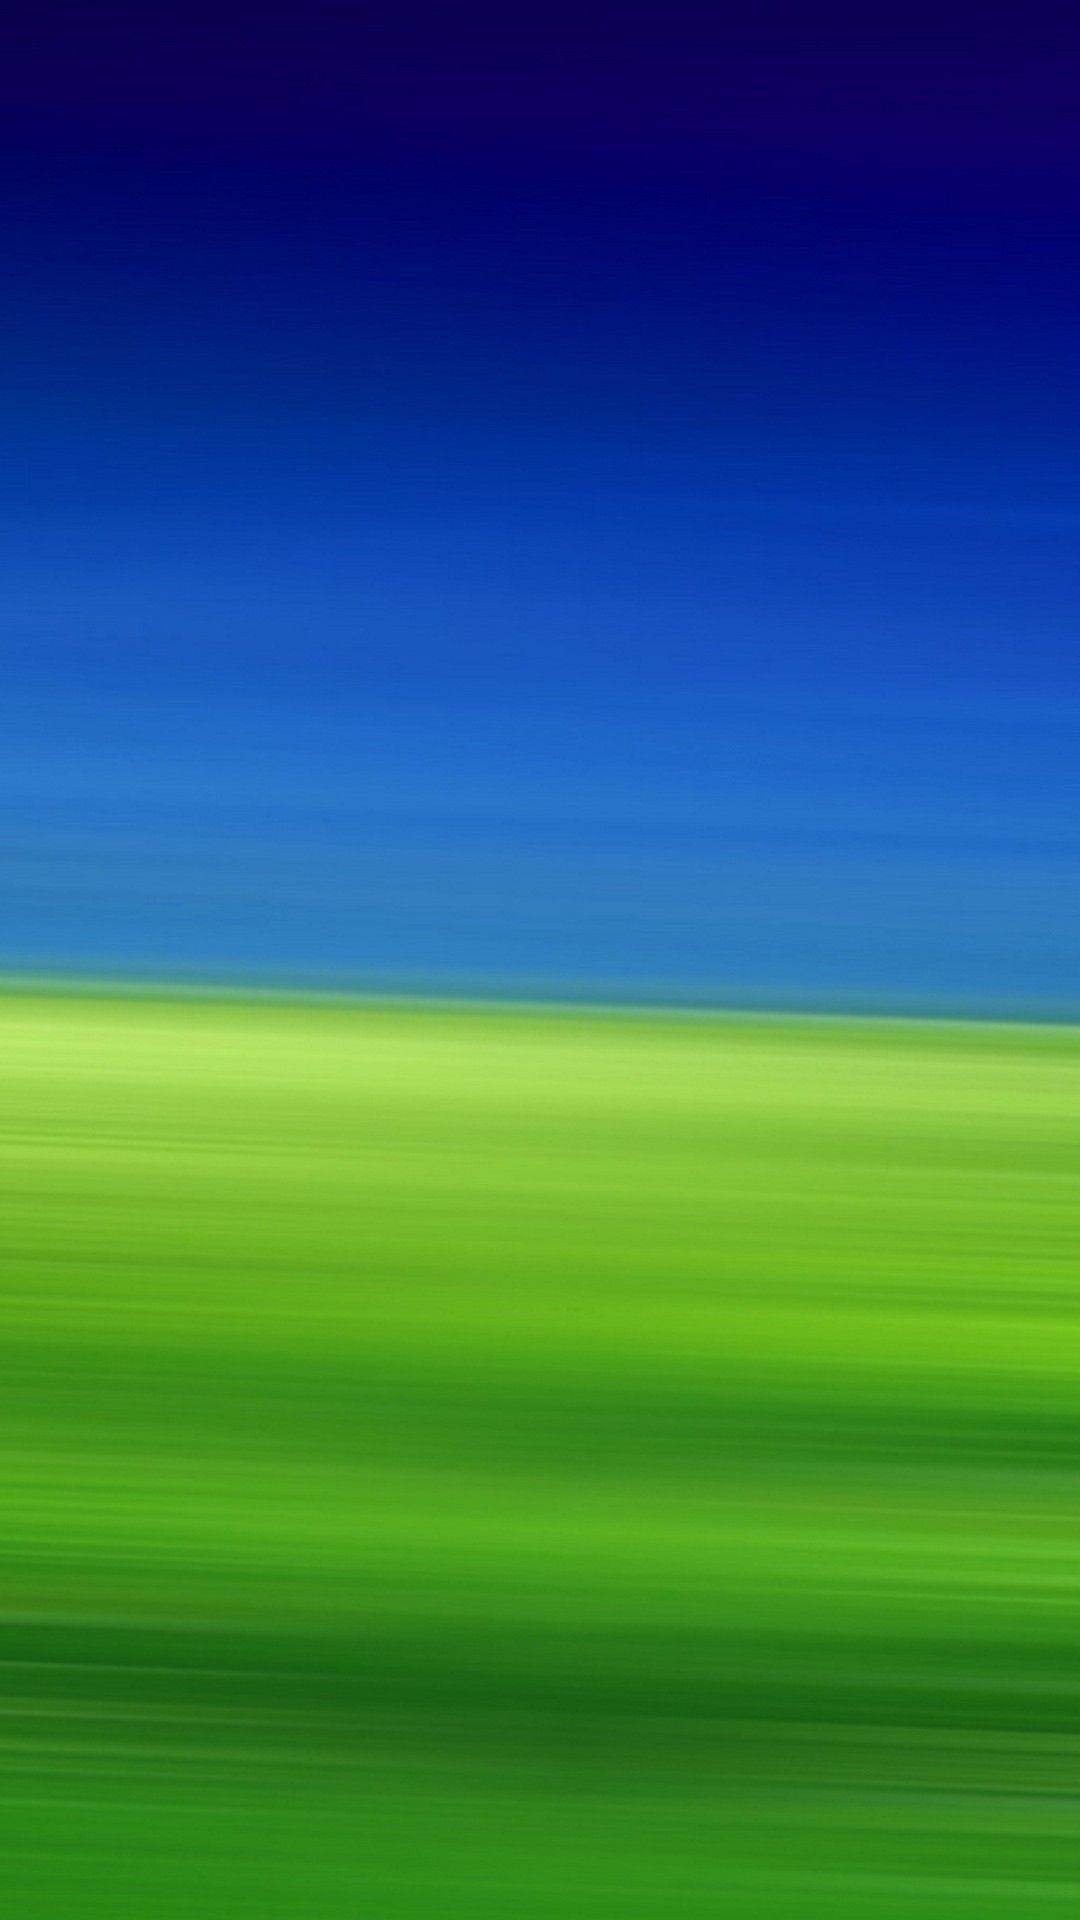 Blue and Green HD Wallpaper For Android Android Wallpaper